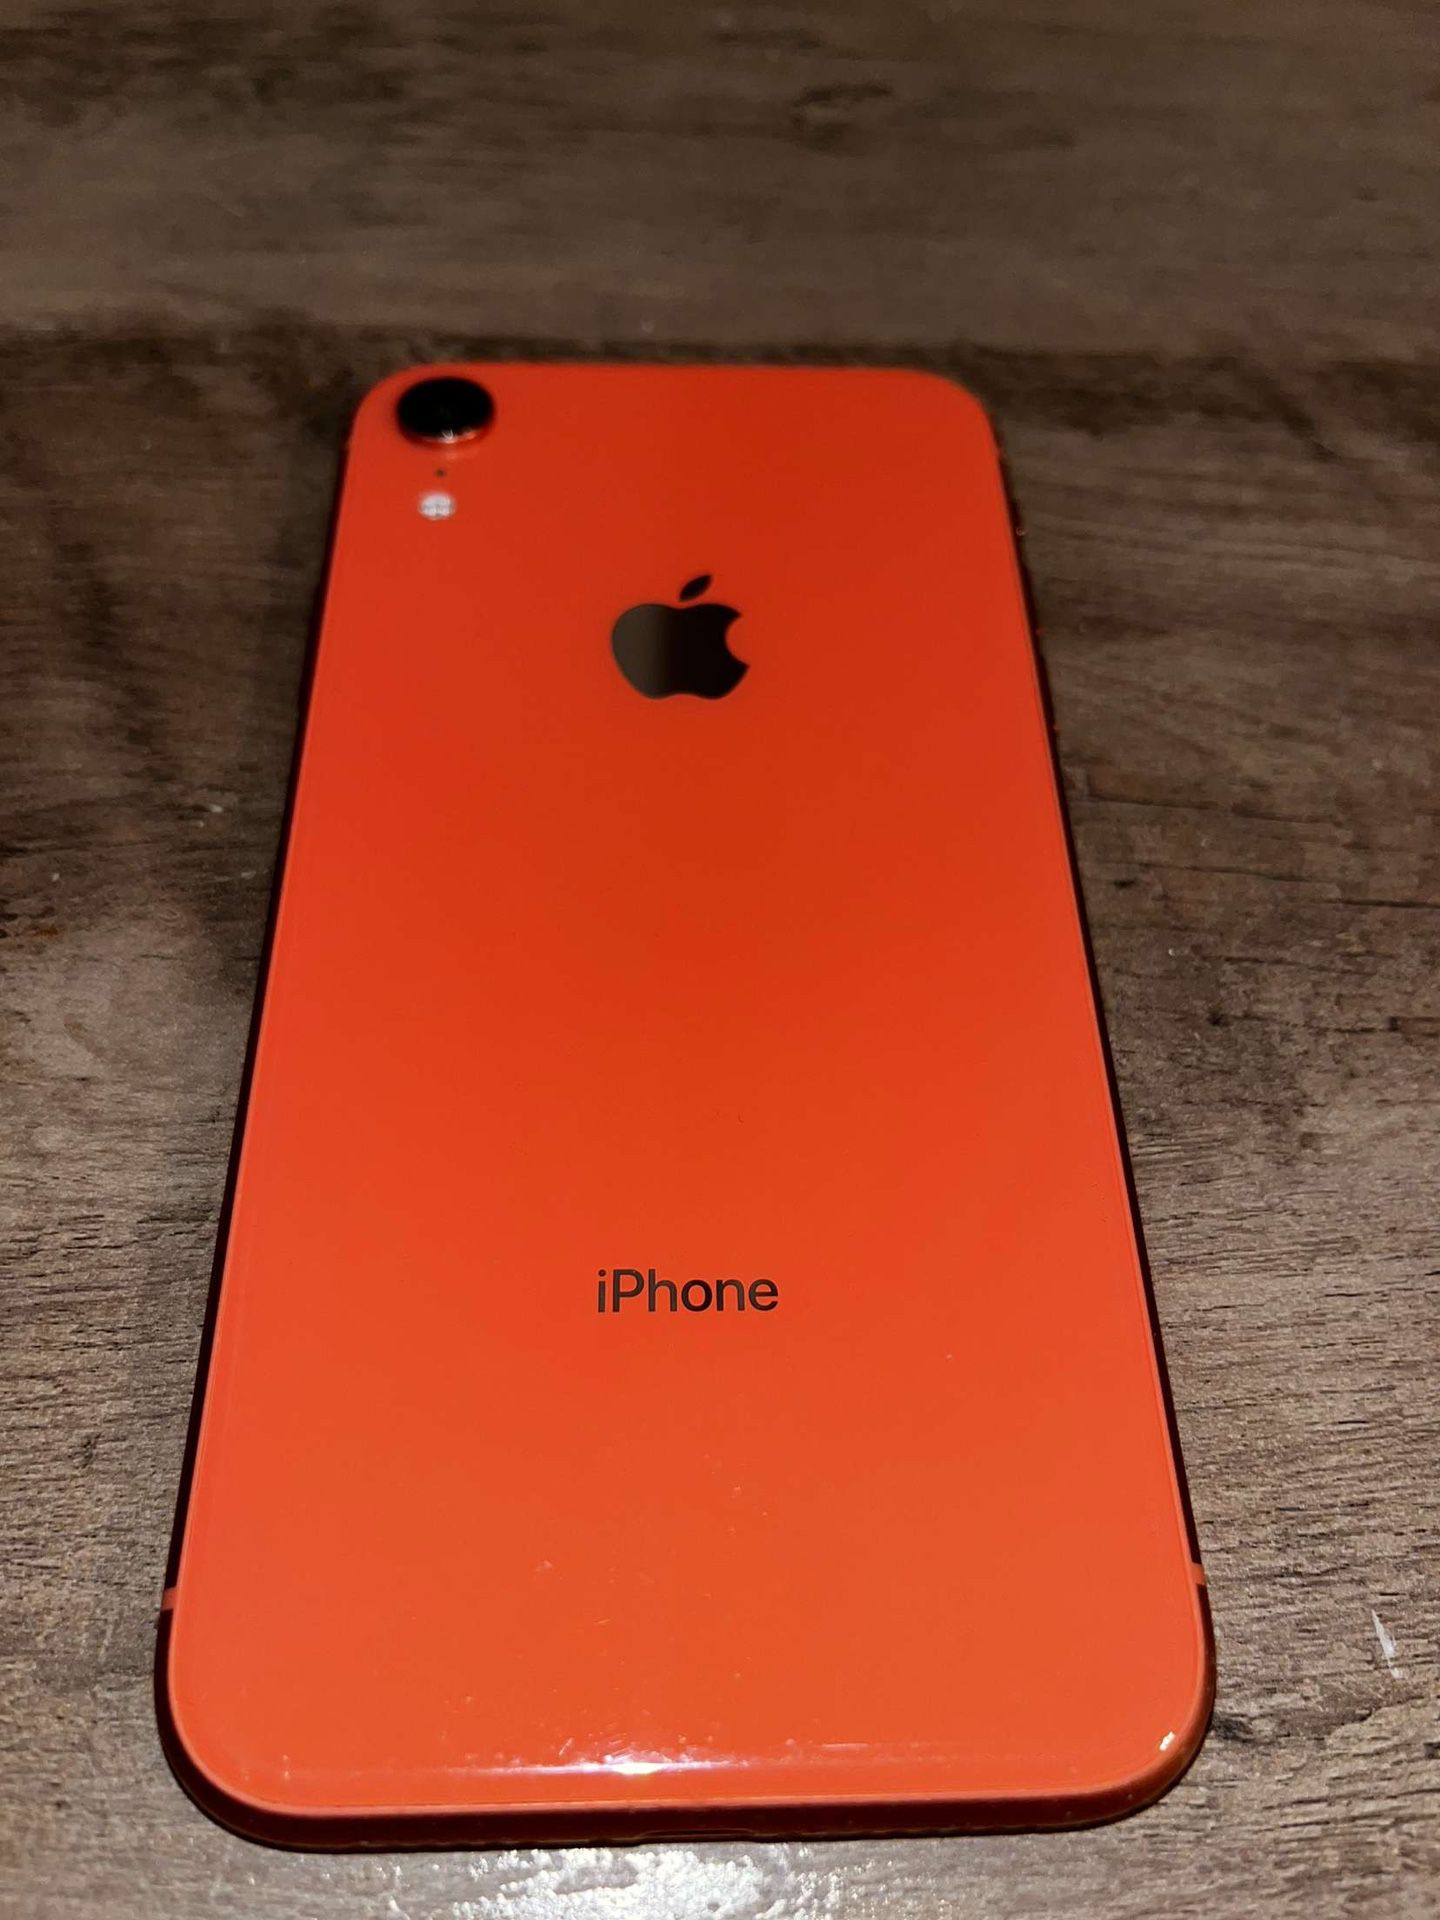 iPhone Xr Coral  GB for Sale in Fresno, CA   OfferUp